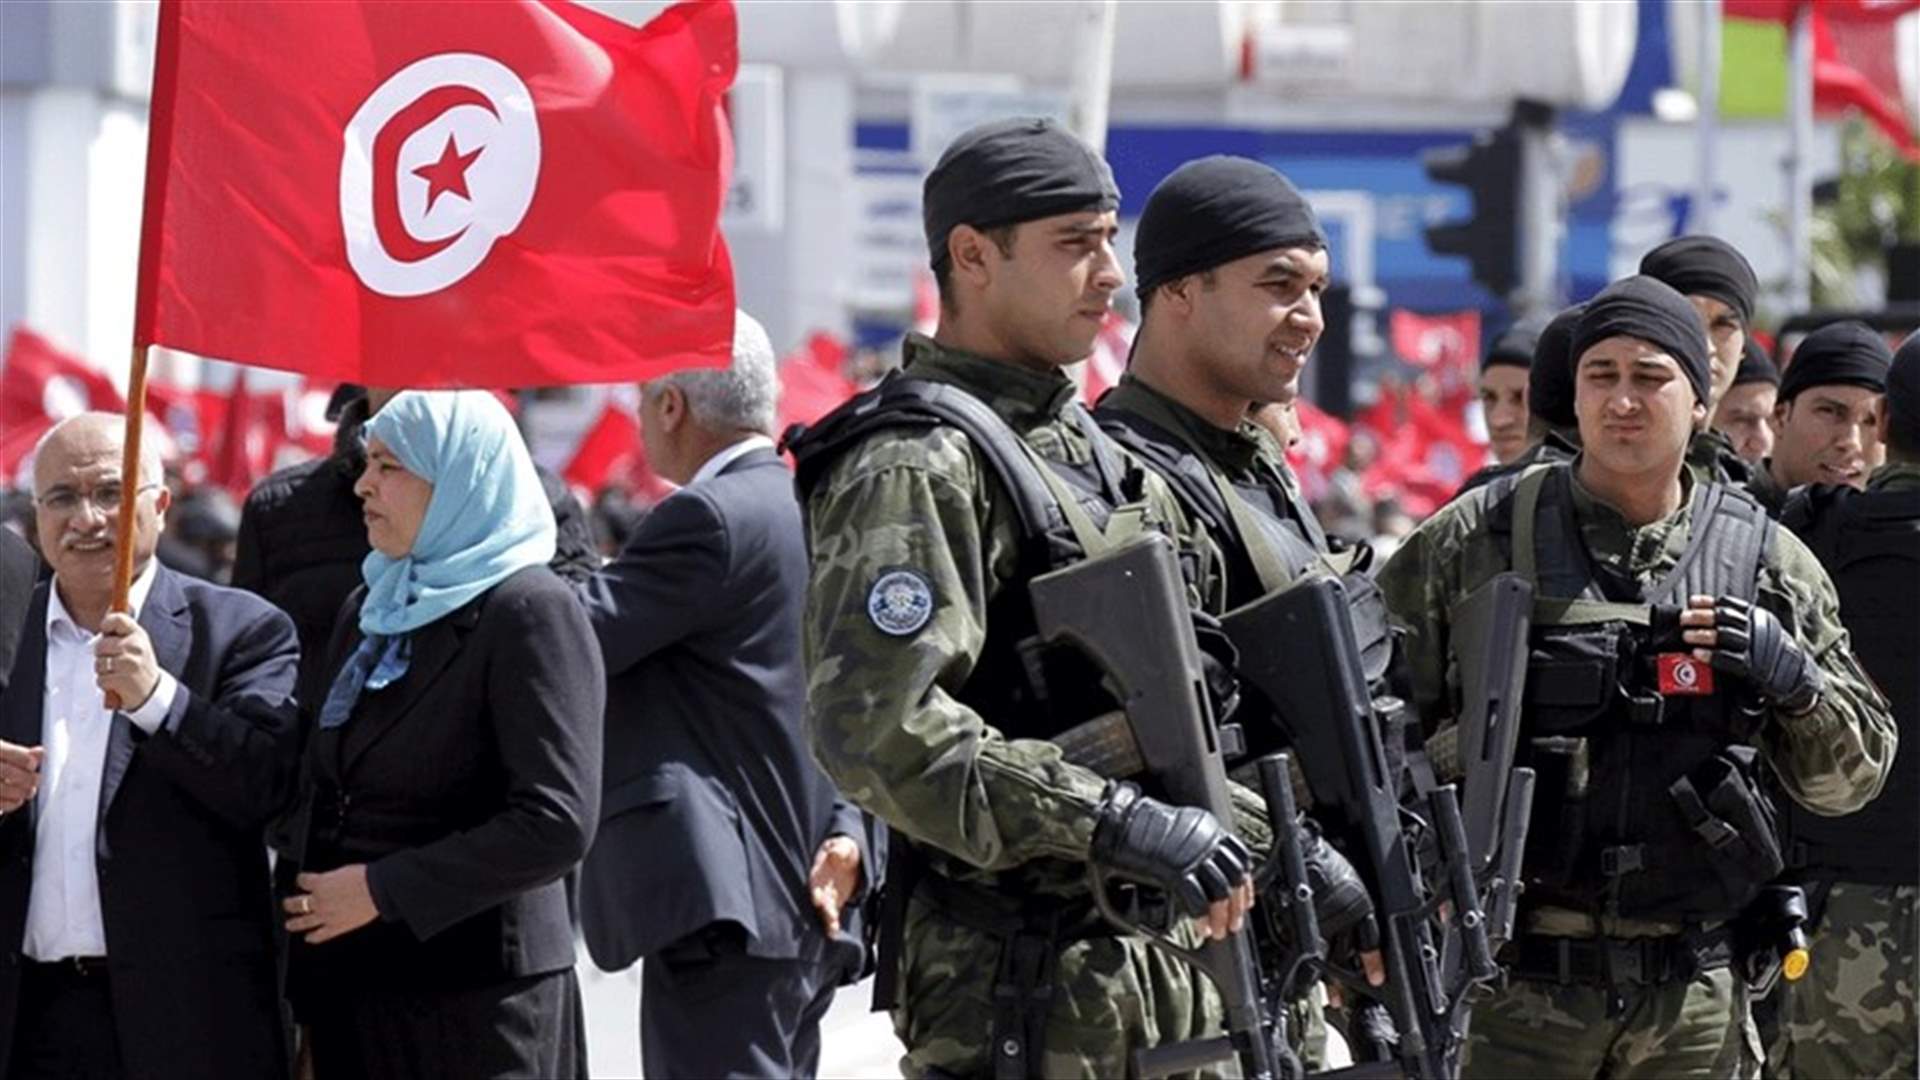 Man with knife arrested trying to enter Tunisian parliament - officials